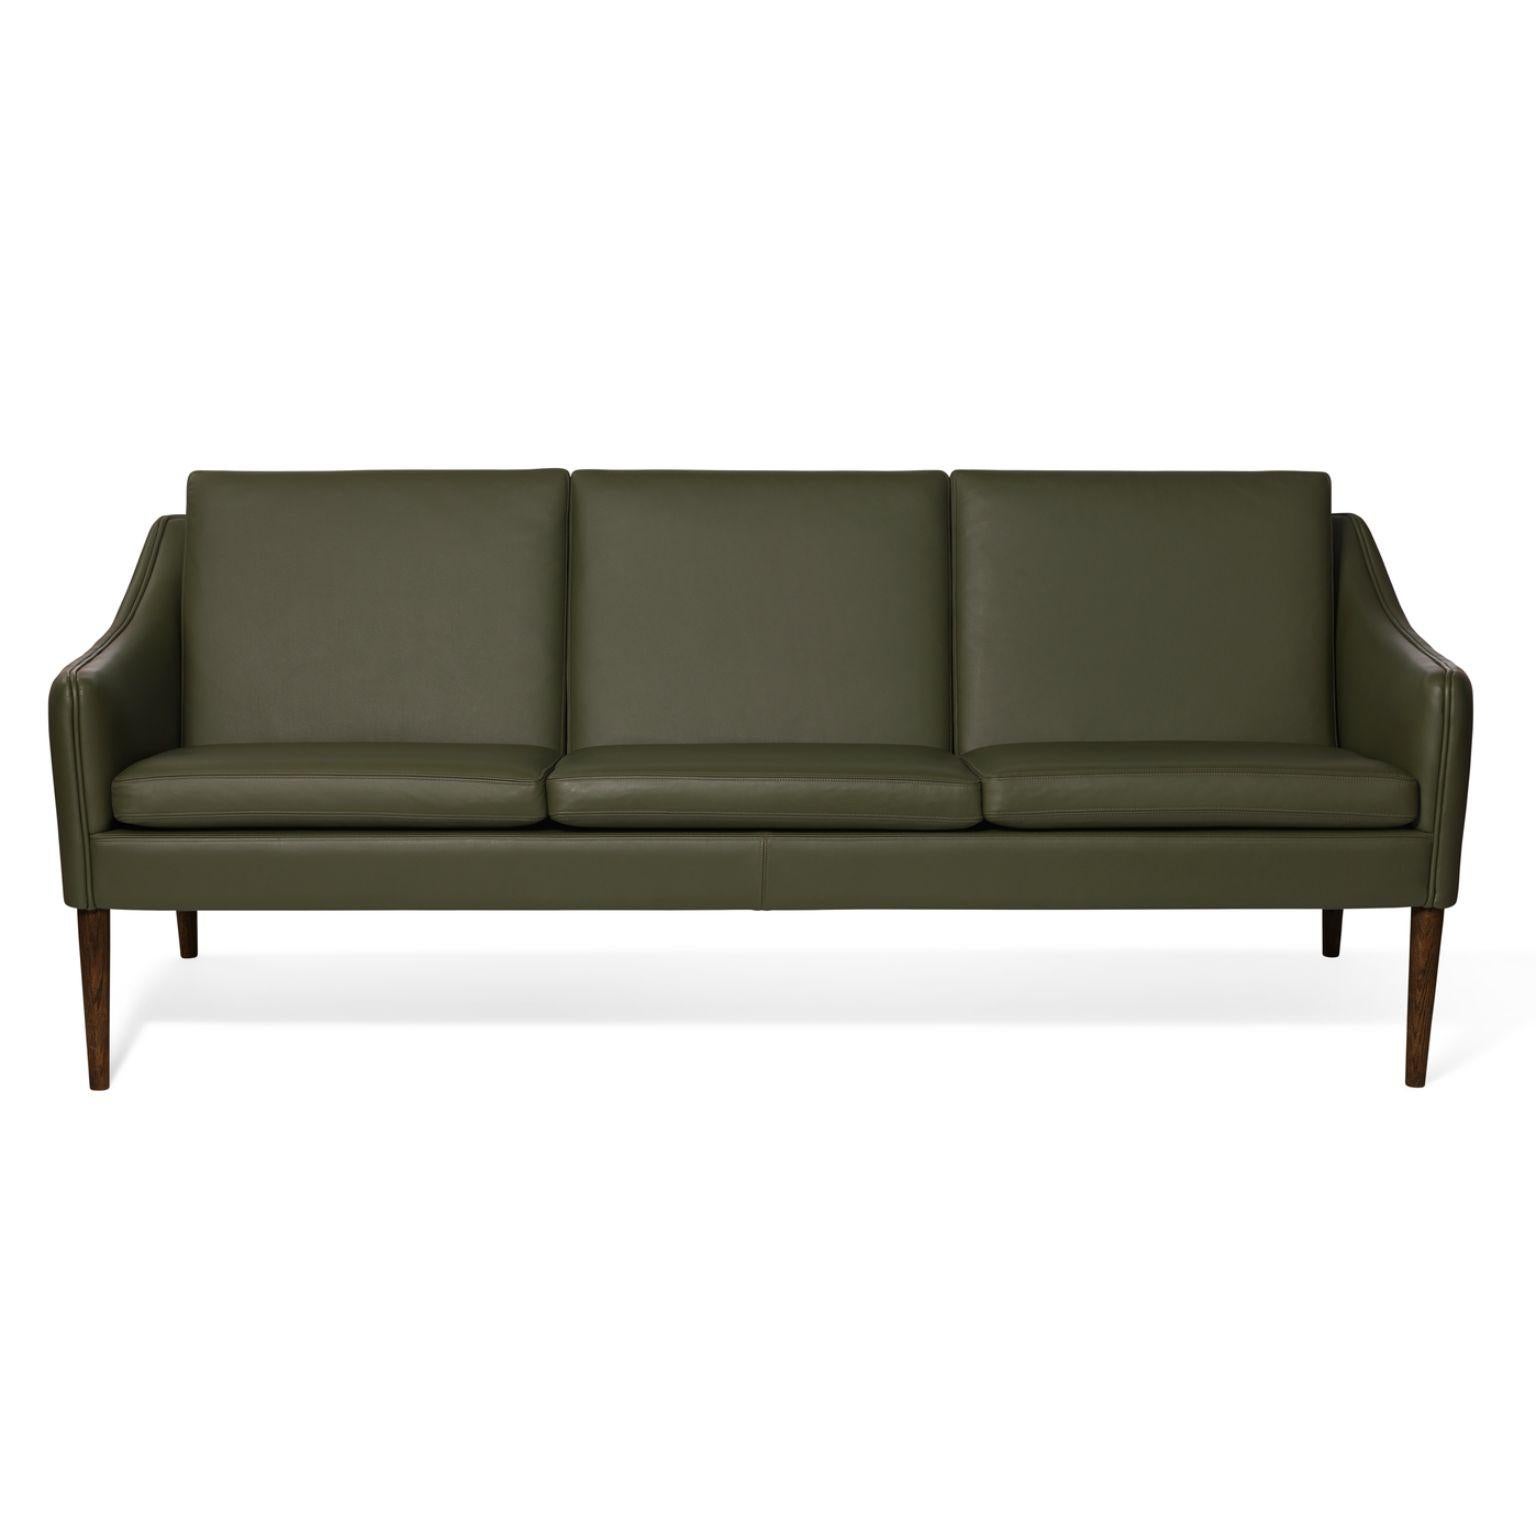 Mr Olsen 3 seater walnut challenger pickle green leather by Warm Nordic
Dimensions: D 201 x W 79 x H 78/46 cm
Material: Textile upholstery, Foam, Spring system, Solid oiled oak legs, Solid smoked oak legs, Leather
Weight: 50 kg
Also available in